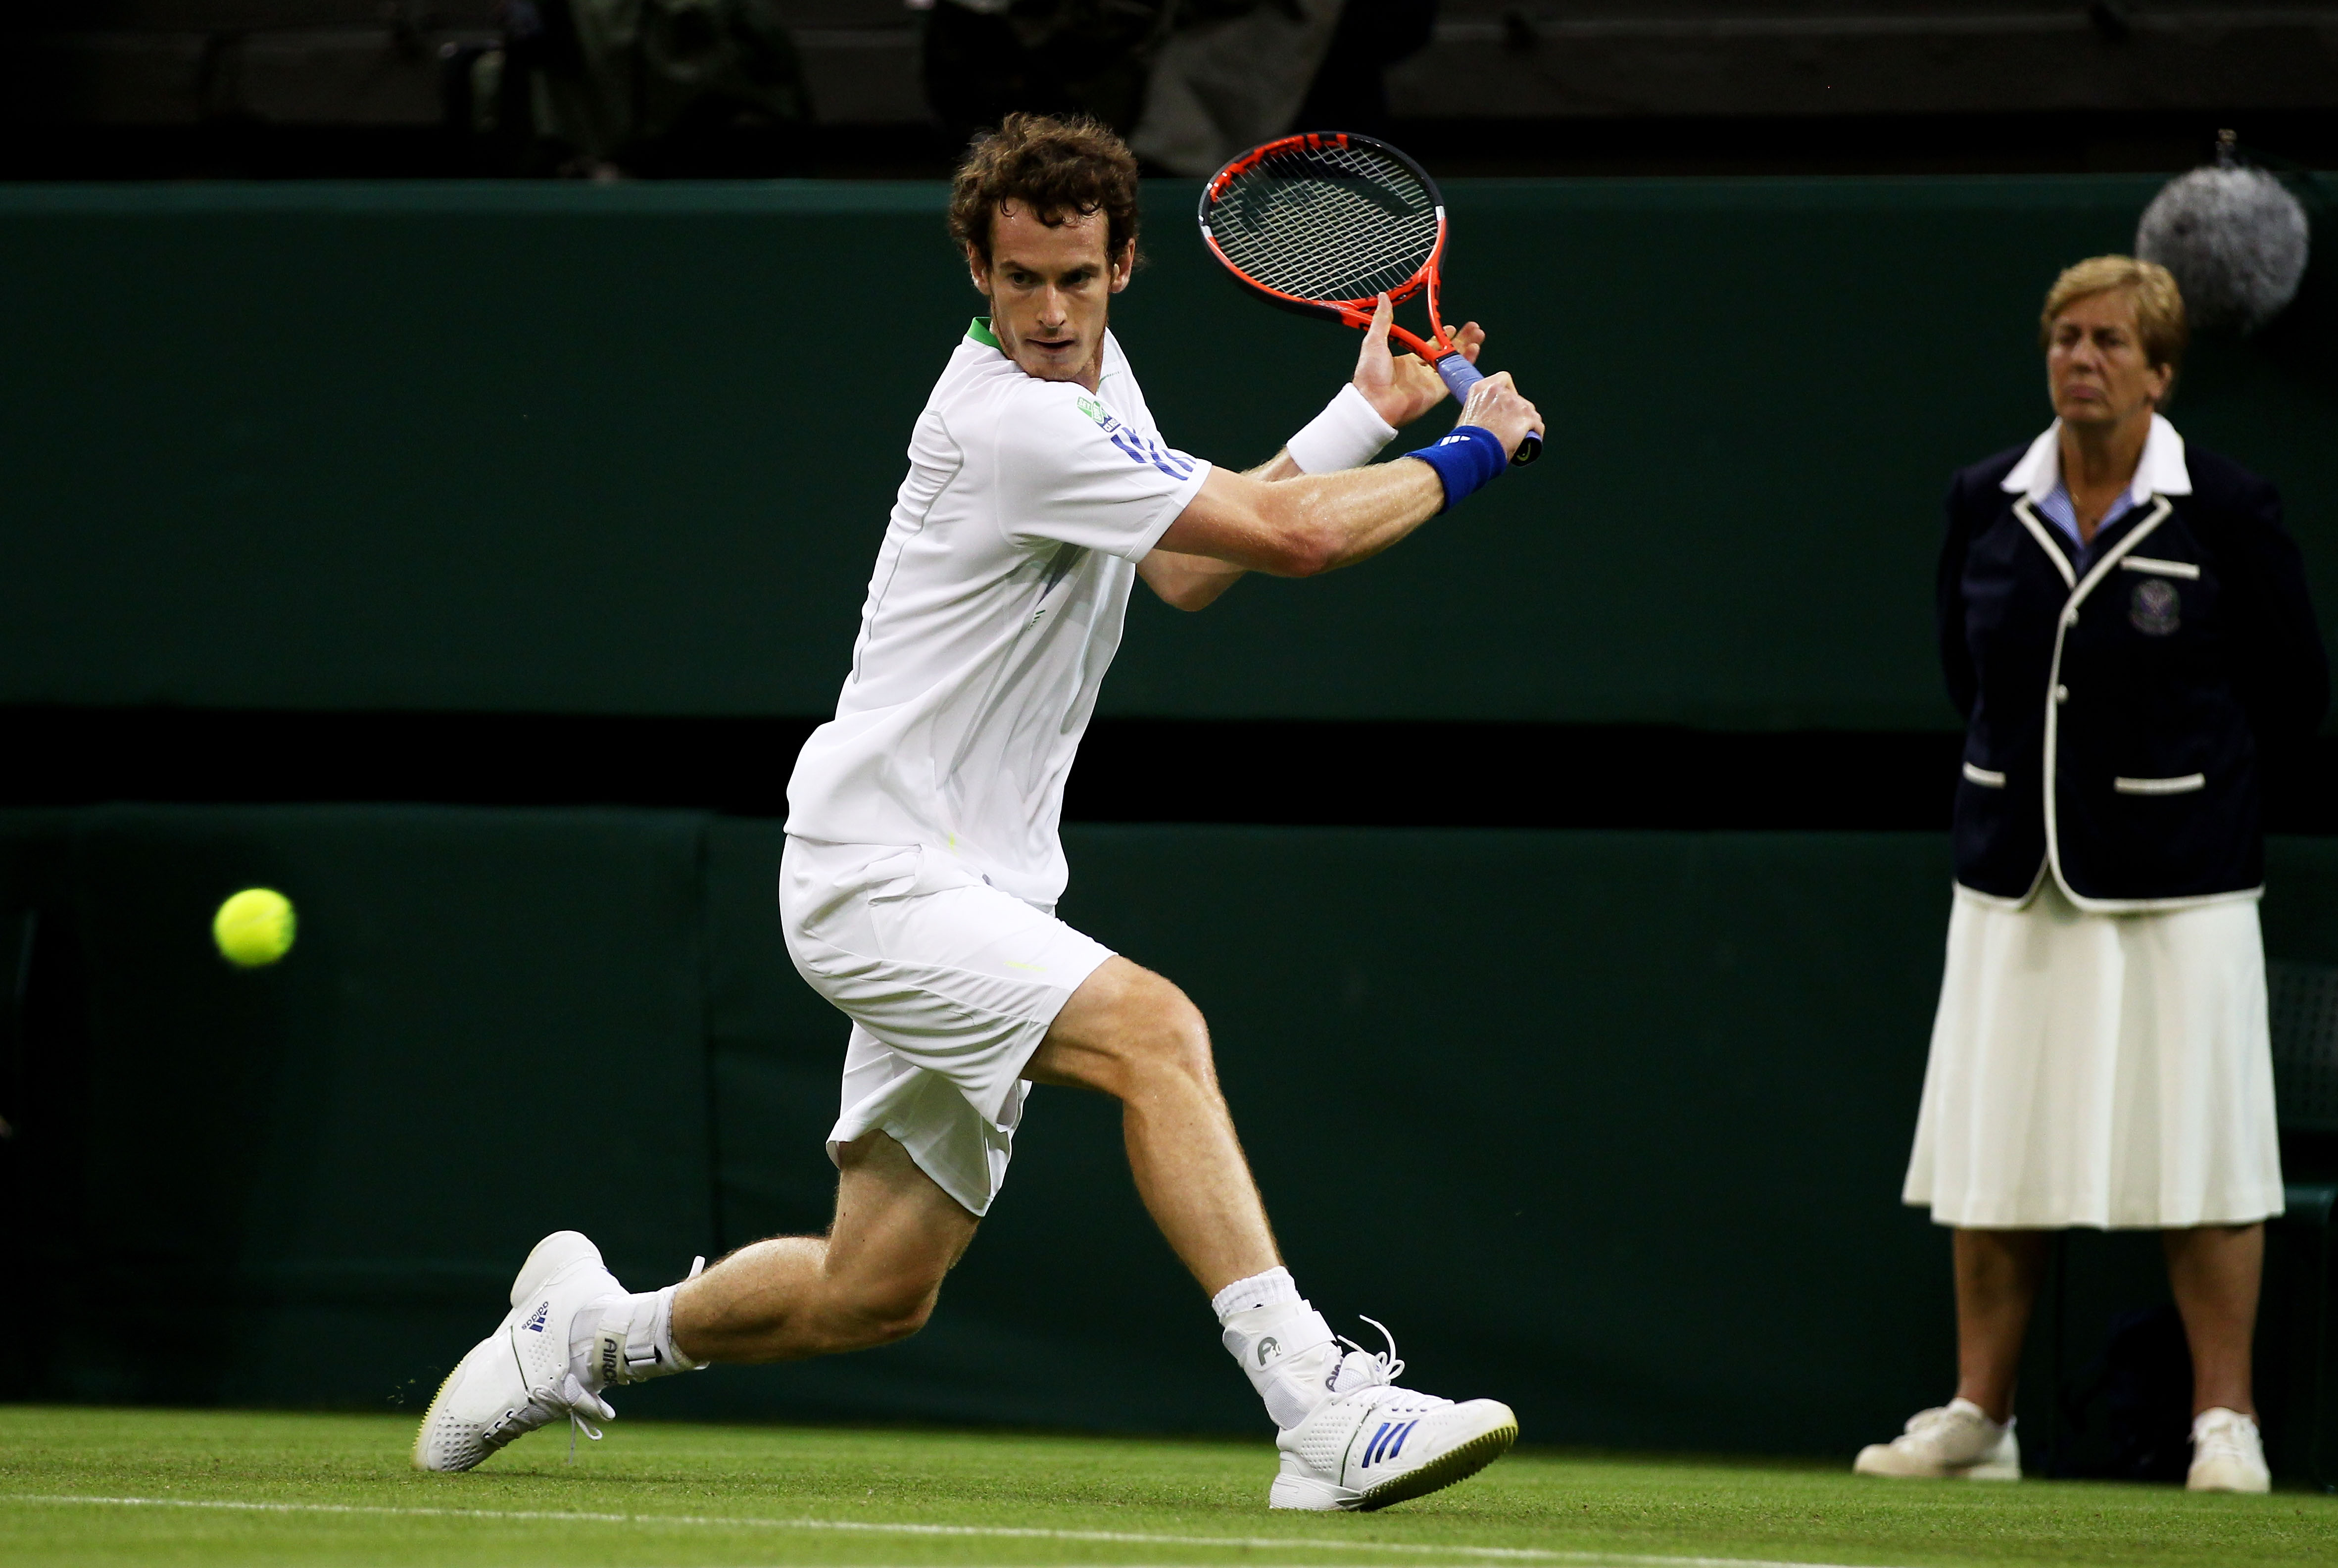 LONDON, ENGLAND - JUNE 20:  Andy Murray of Great Britain hits a backhand during his first round match against Daniel Gimeno-Traver of Spain on Day One of the Wimbledon Lawn Tennis Championships at the All England Lawn Tennis and Croquet Club on June 20, 2